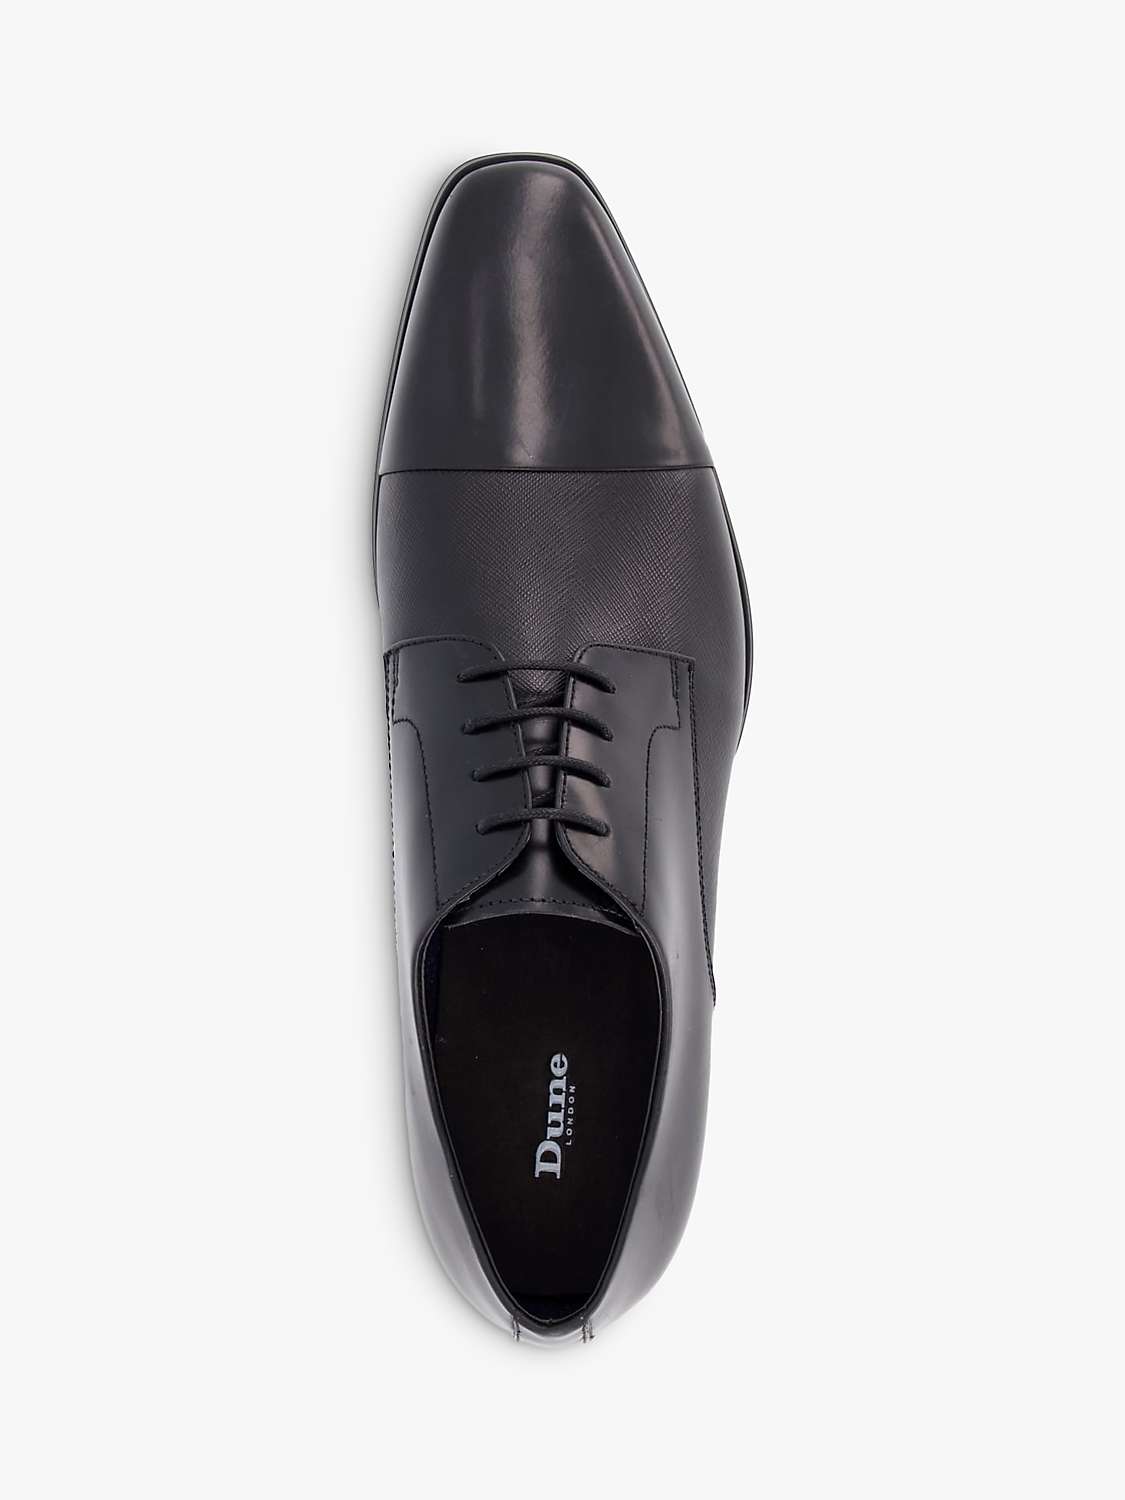 Dune Sheet Leather Lace Up Shoes, Black at John Lewis & Partners